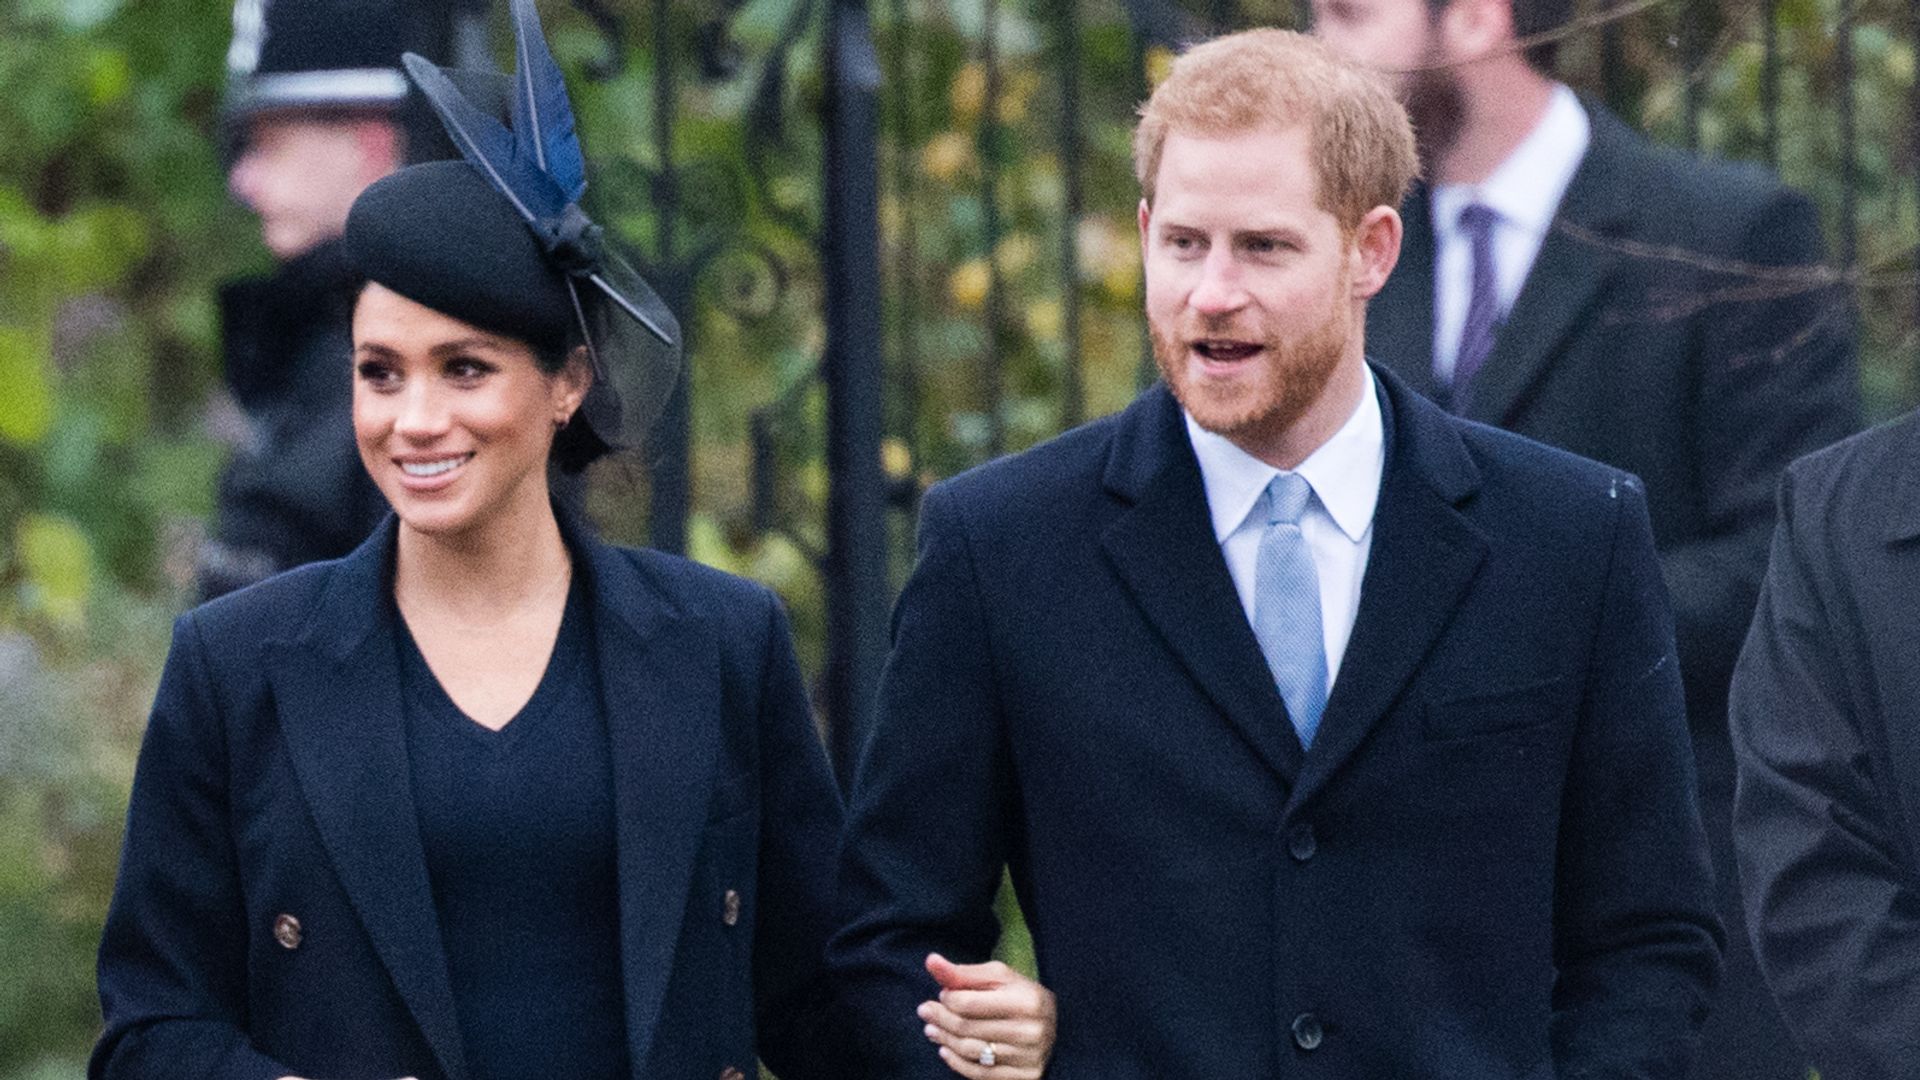 Meghan Markle and Prince Harry Harry walking in black